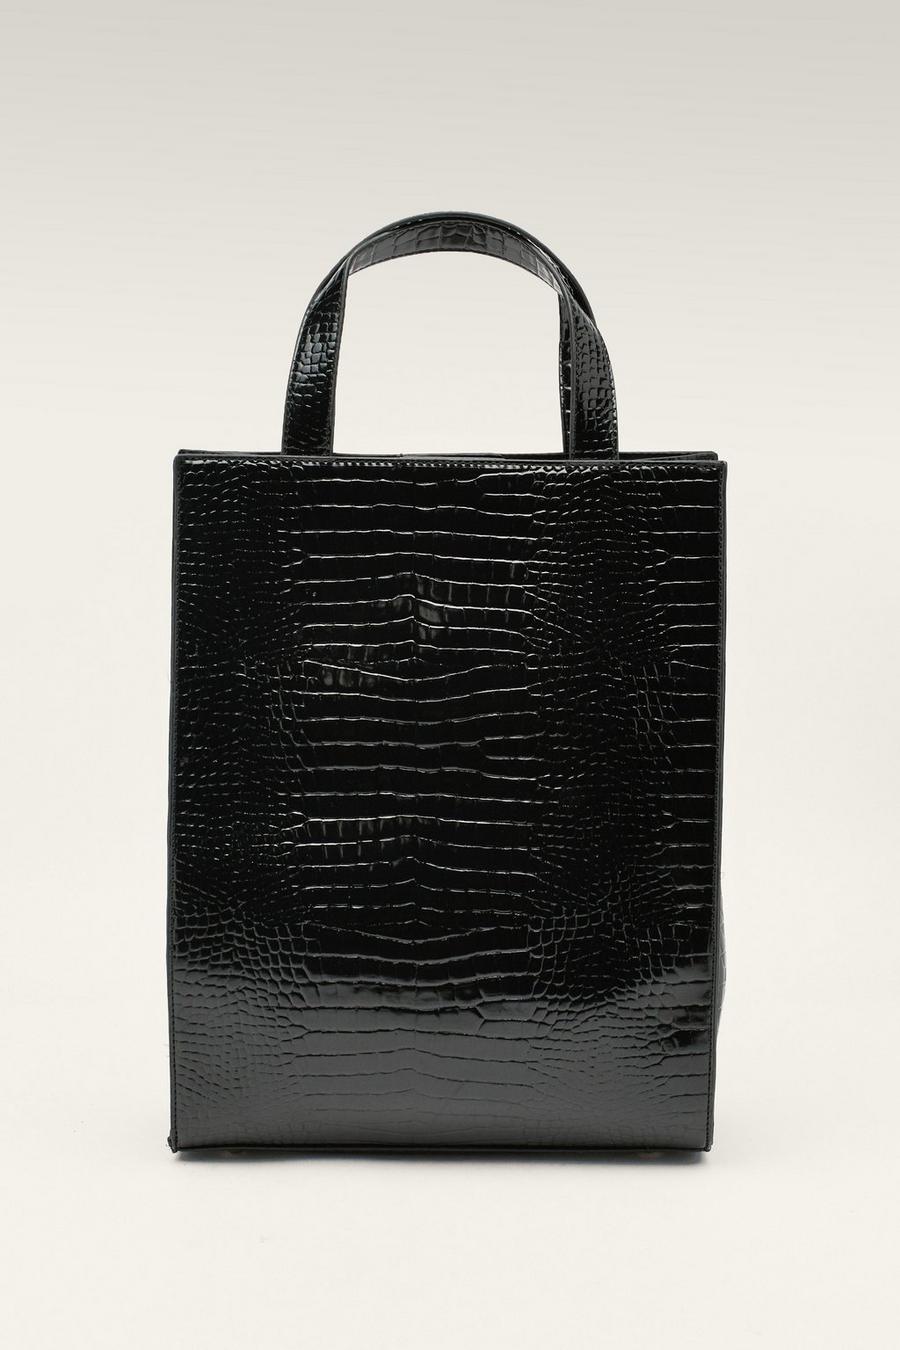  Croc Faux Leather Tote Day Bag